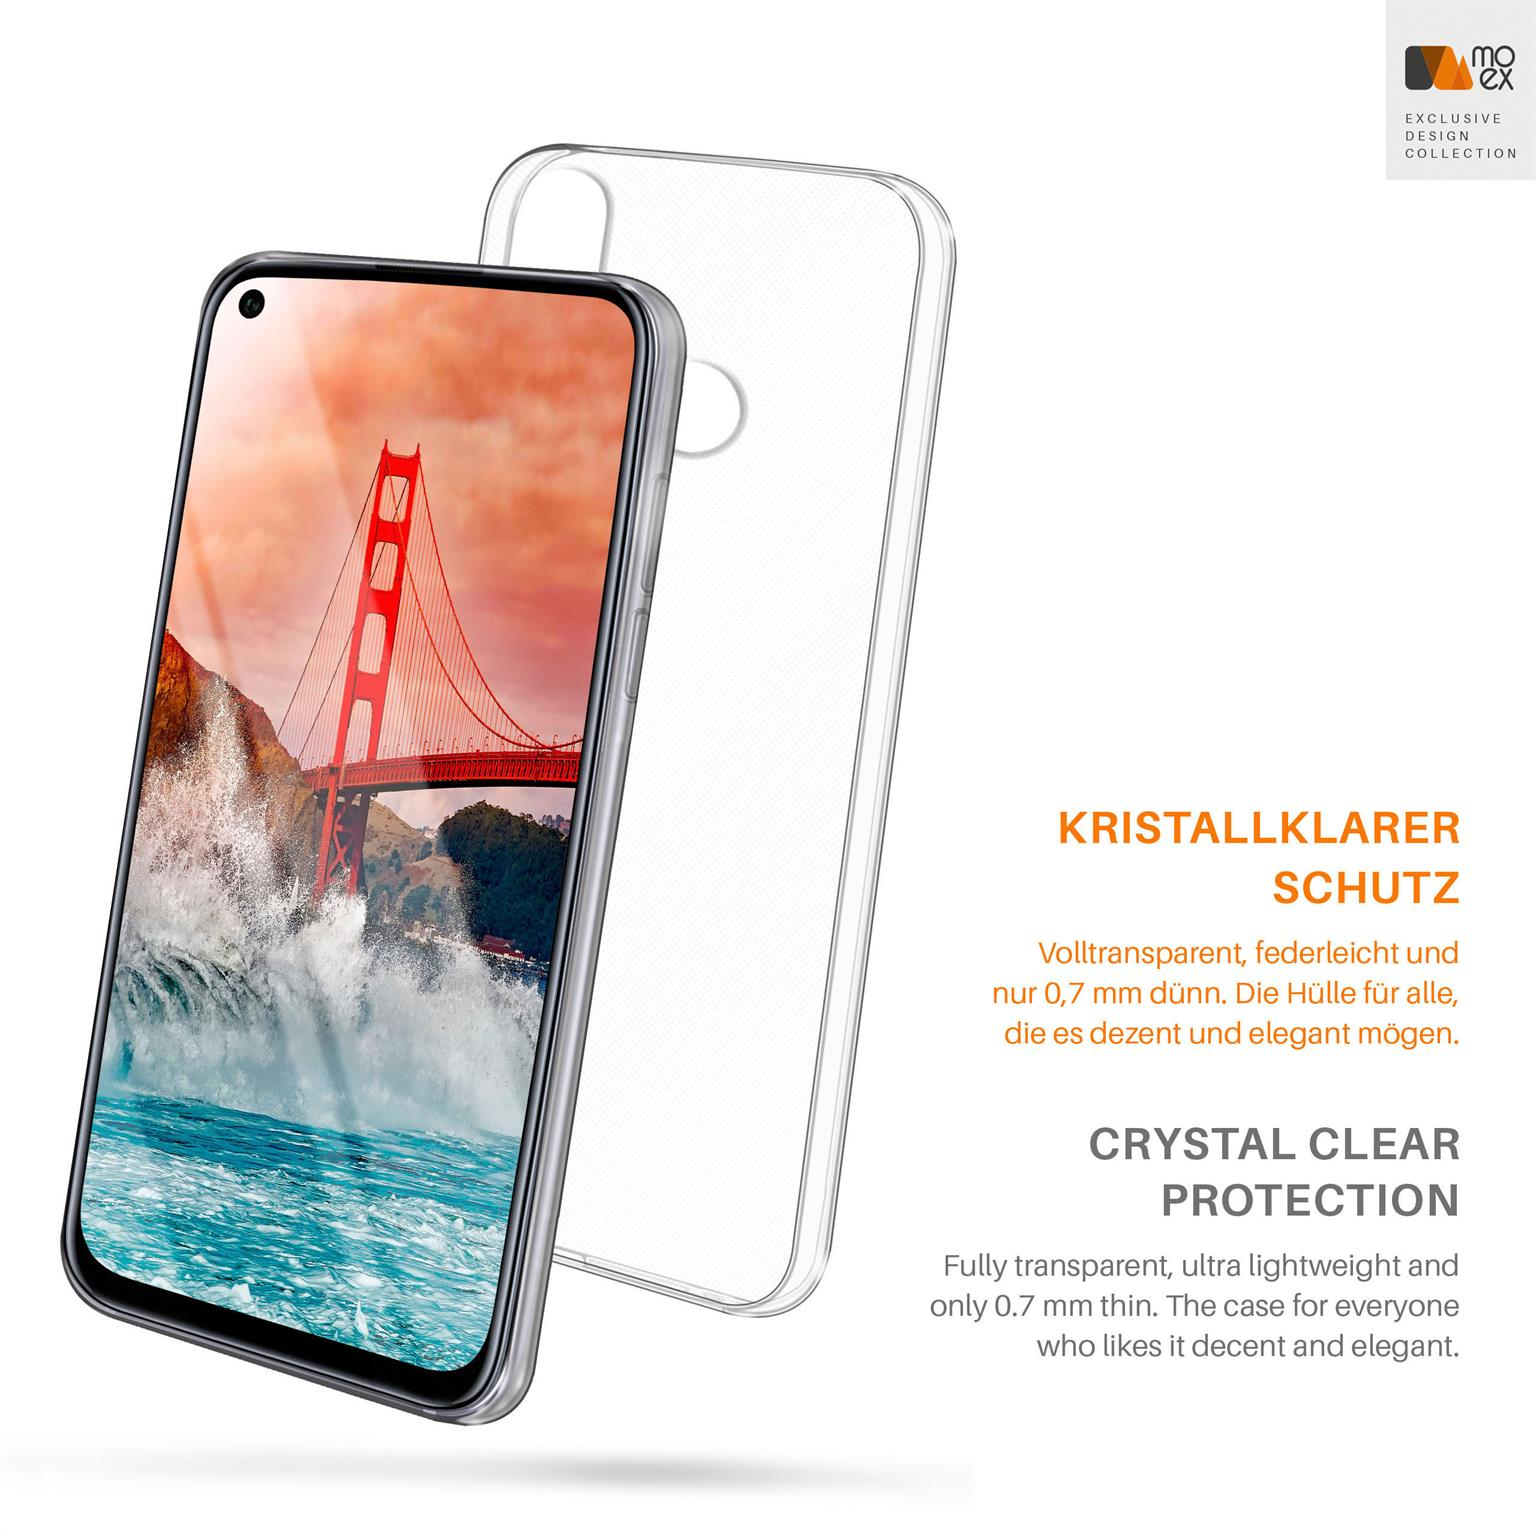 Aero Huawei, Backcover, Lite P20 Case, MOEX Crystal-Clear (2019),